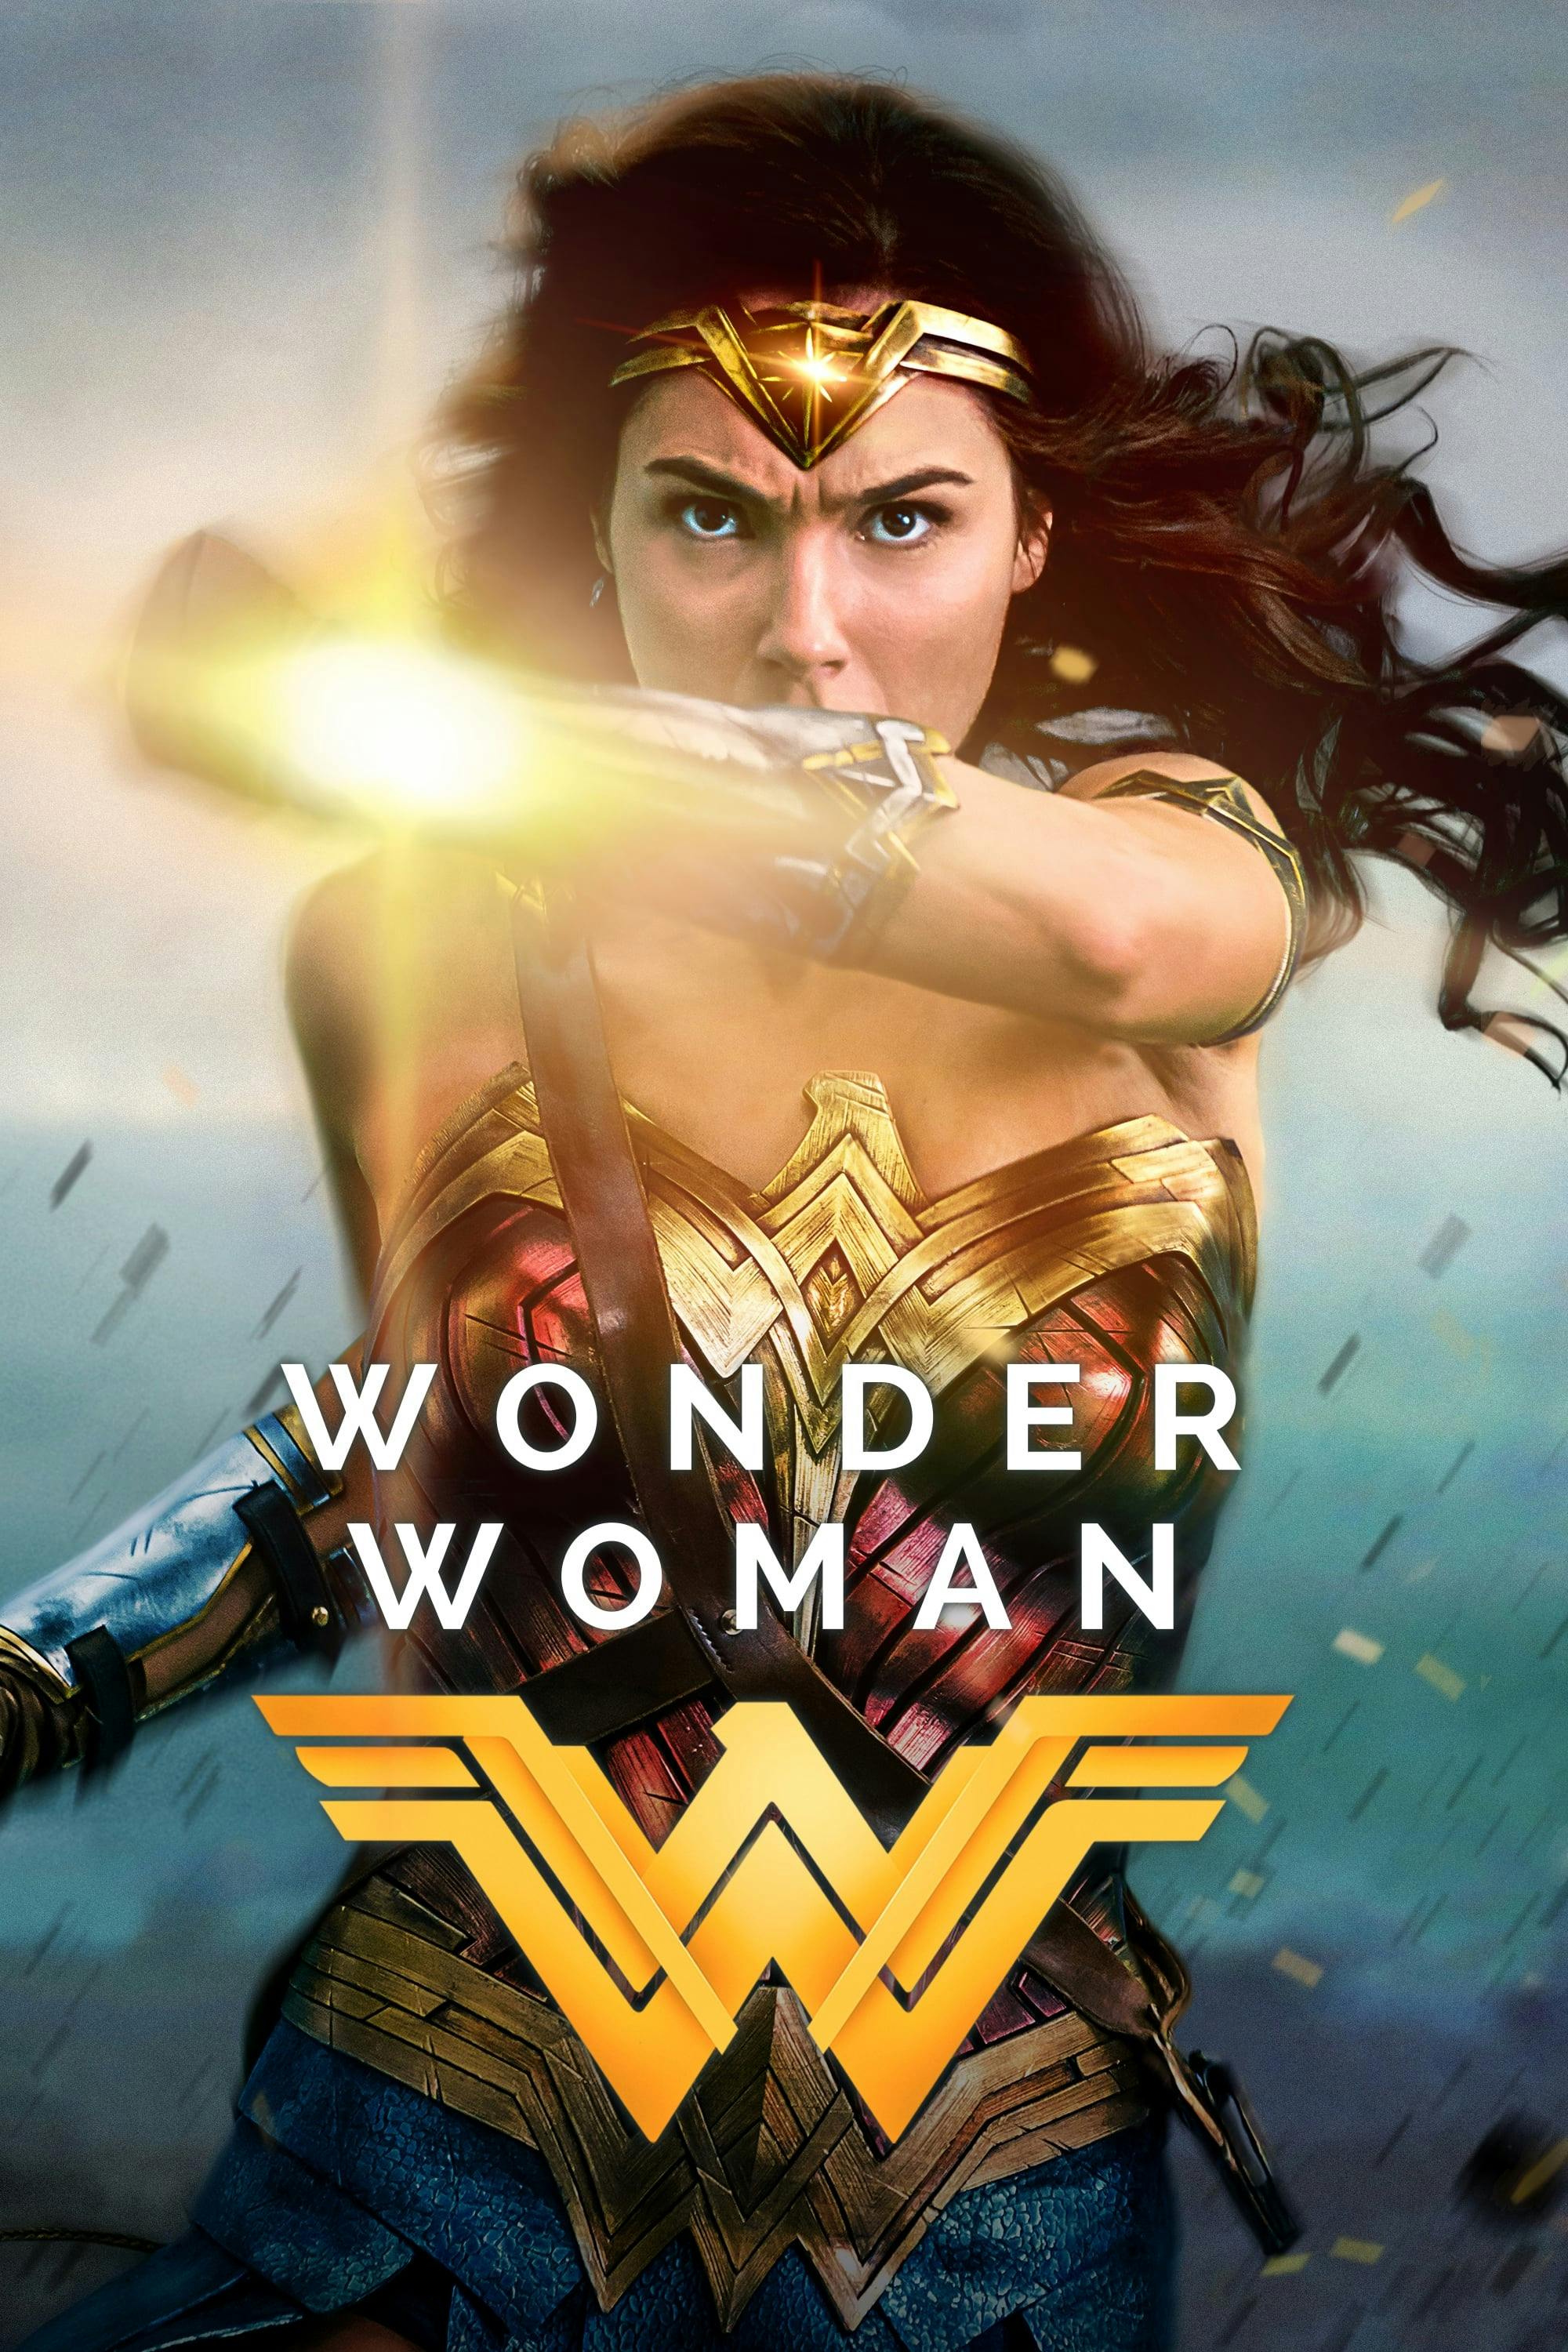 Best Gal Gadot movies to watch on Amazon or iTunes